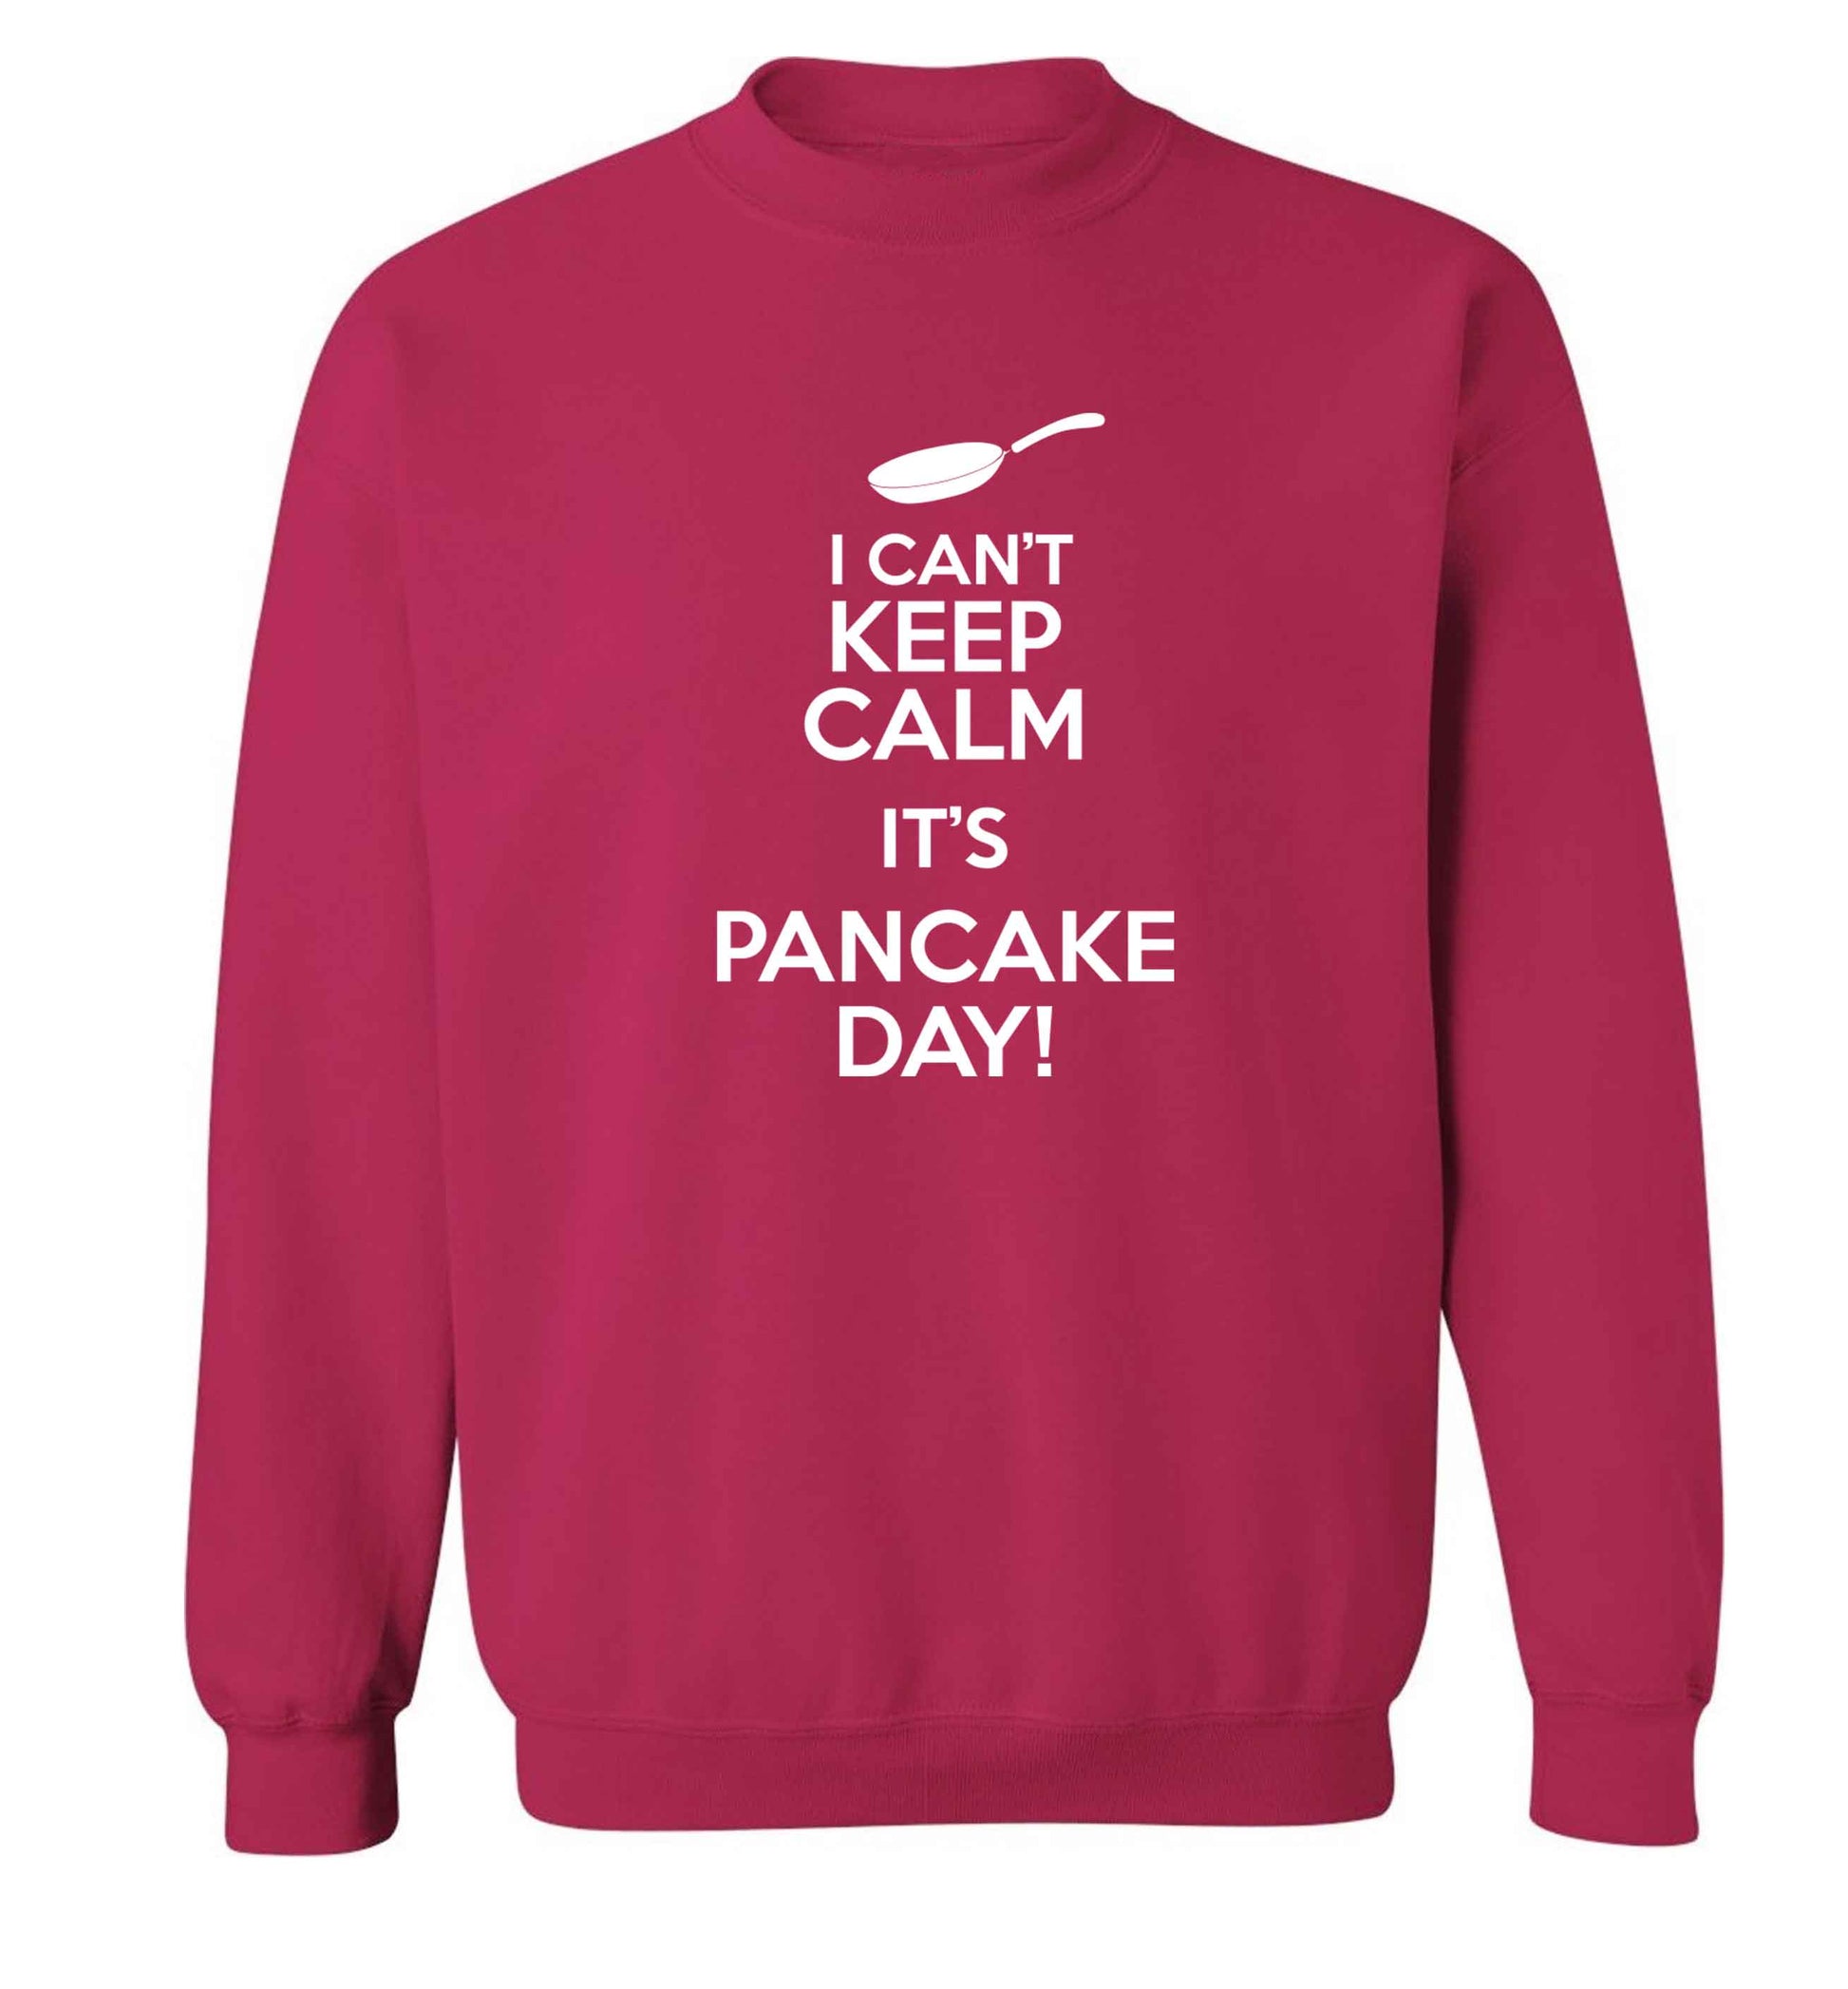 I can't keep calm it's pancake day! adult's unisex pink sweater 2XL